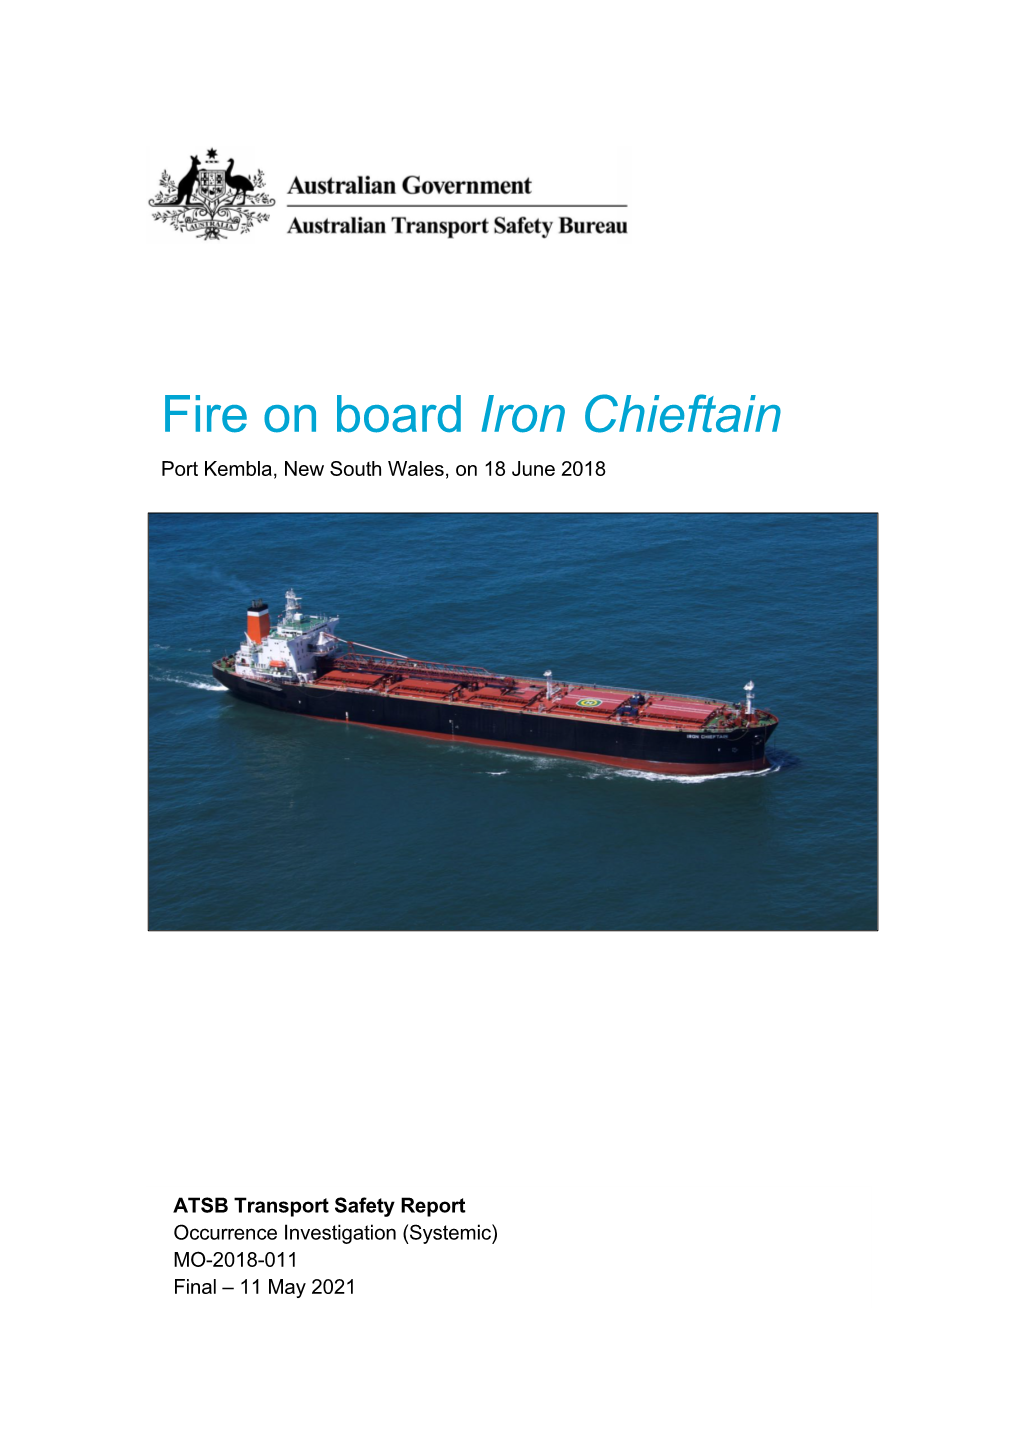 Iron Chieftain Port Kembla, New South Wales, on 18 June 2018